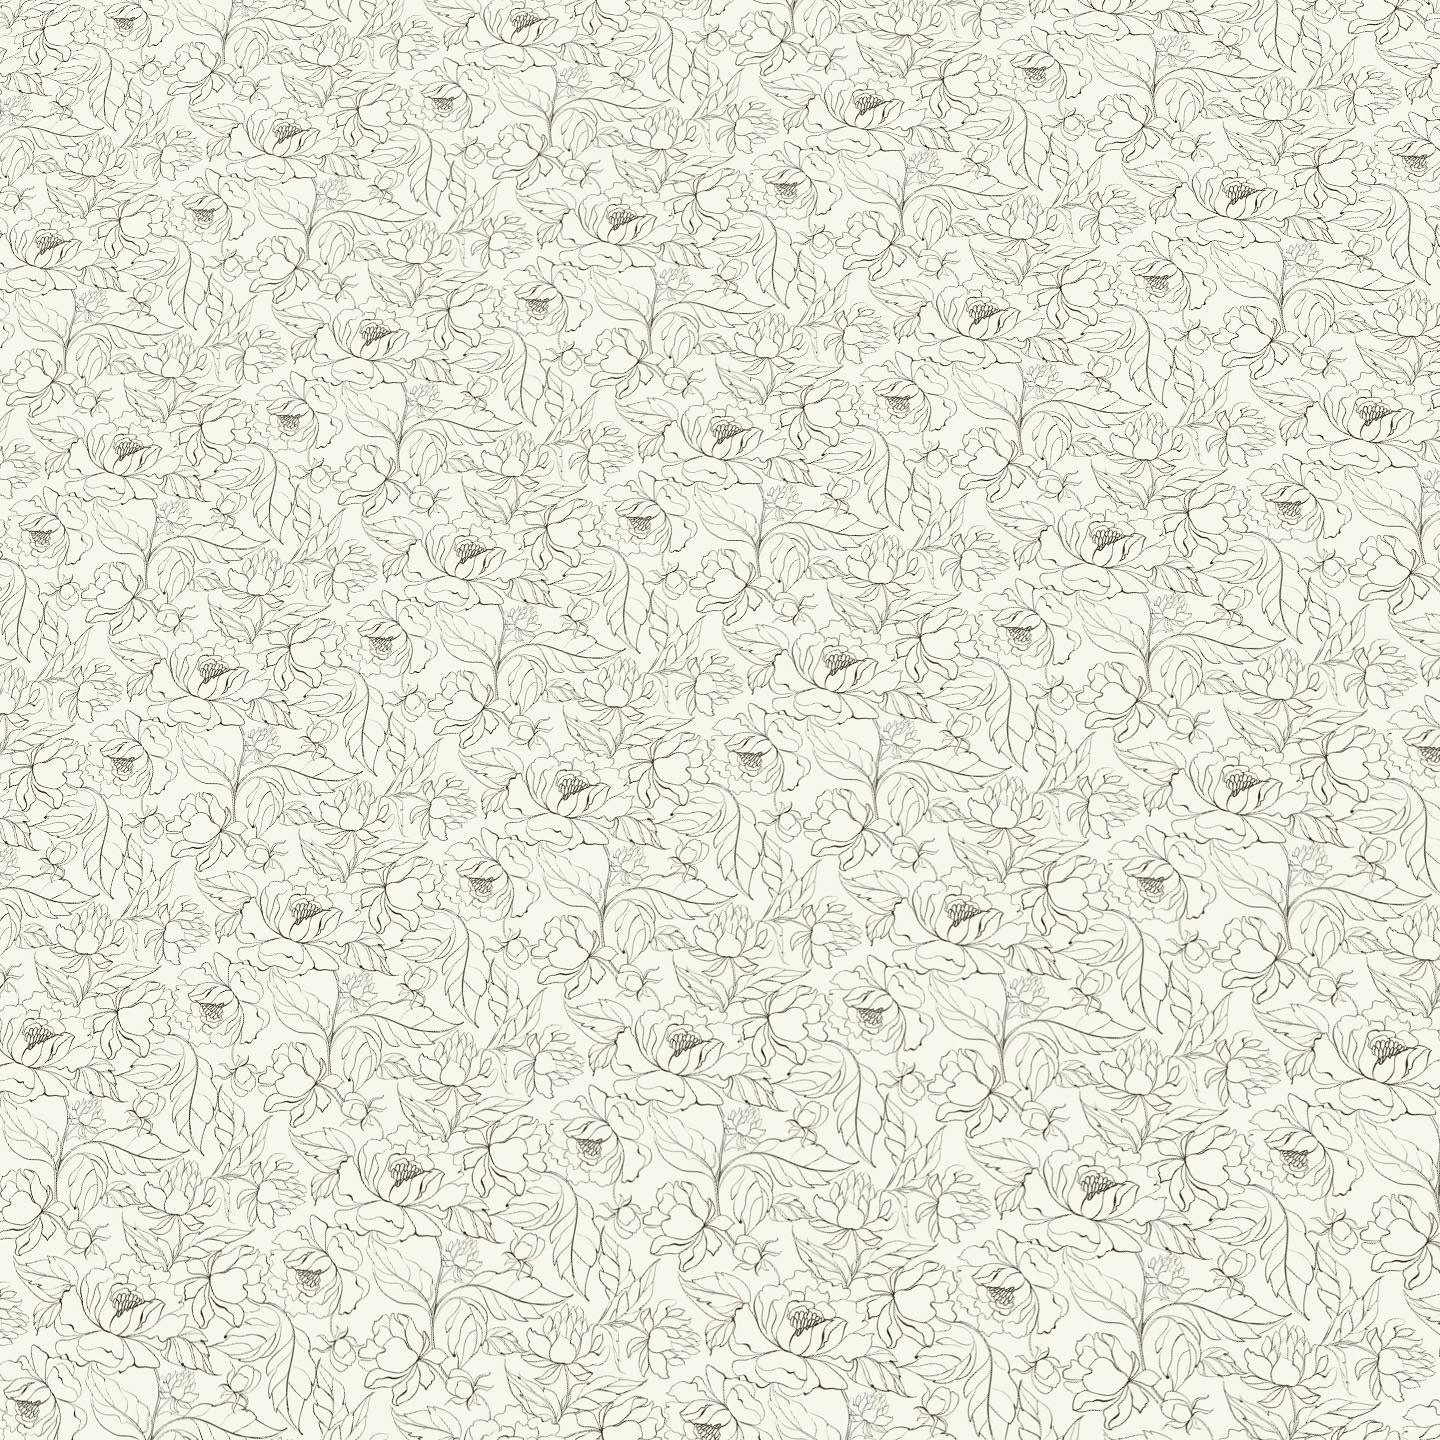 Black and Cream Floral Wallpaper